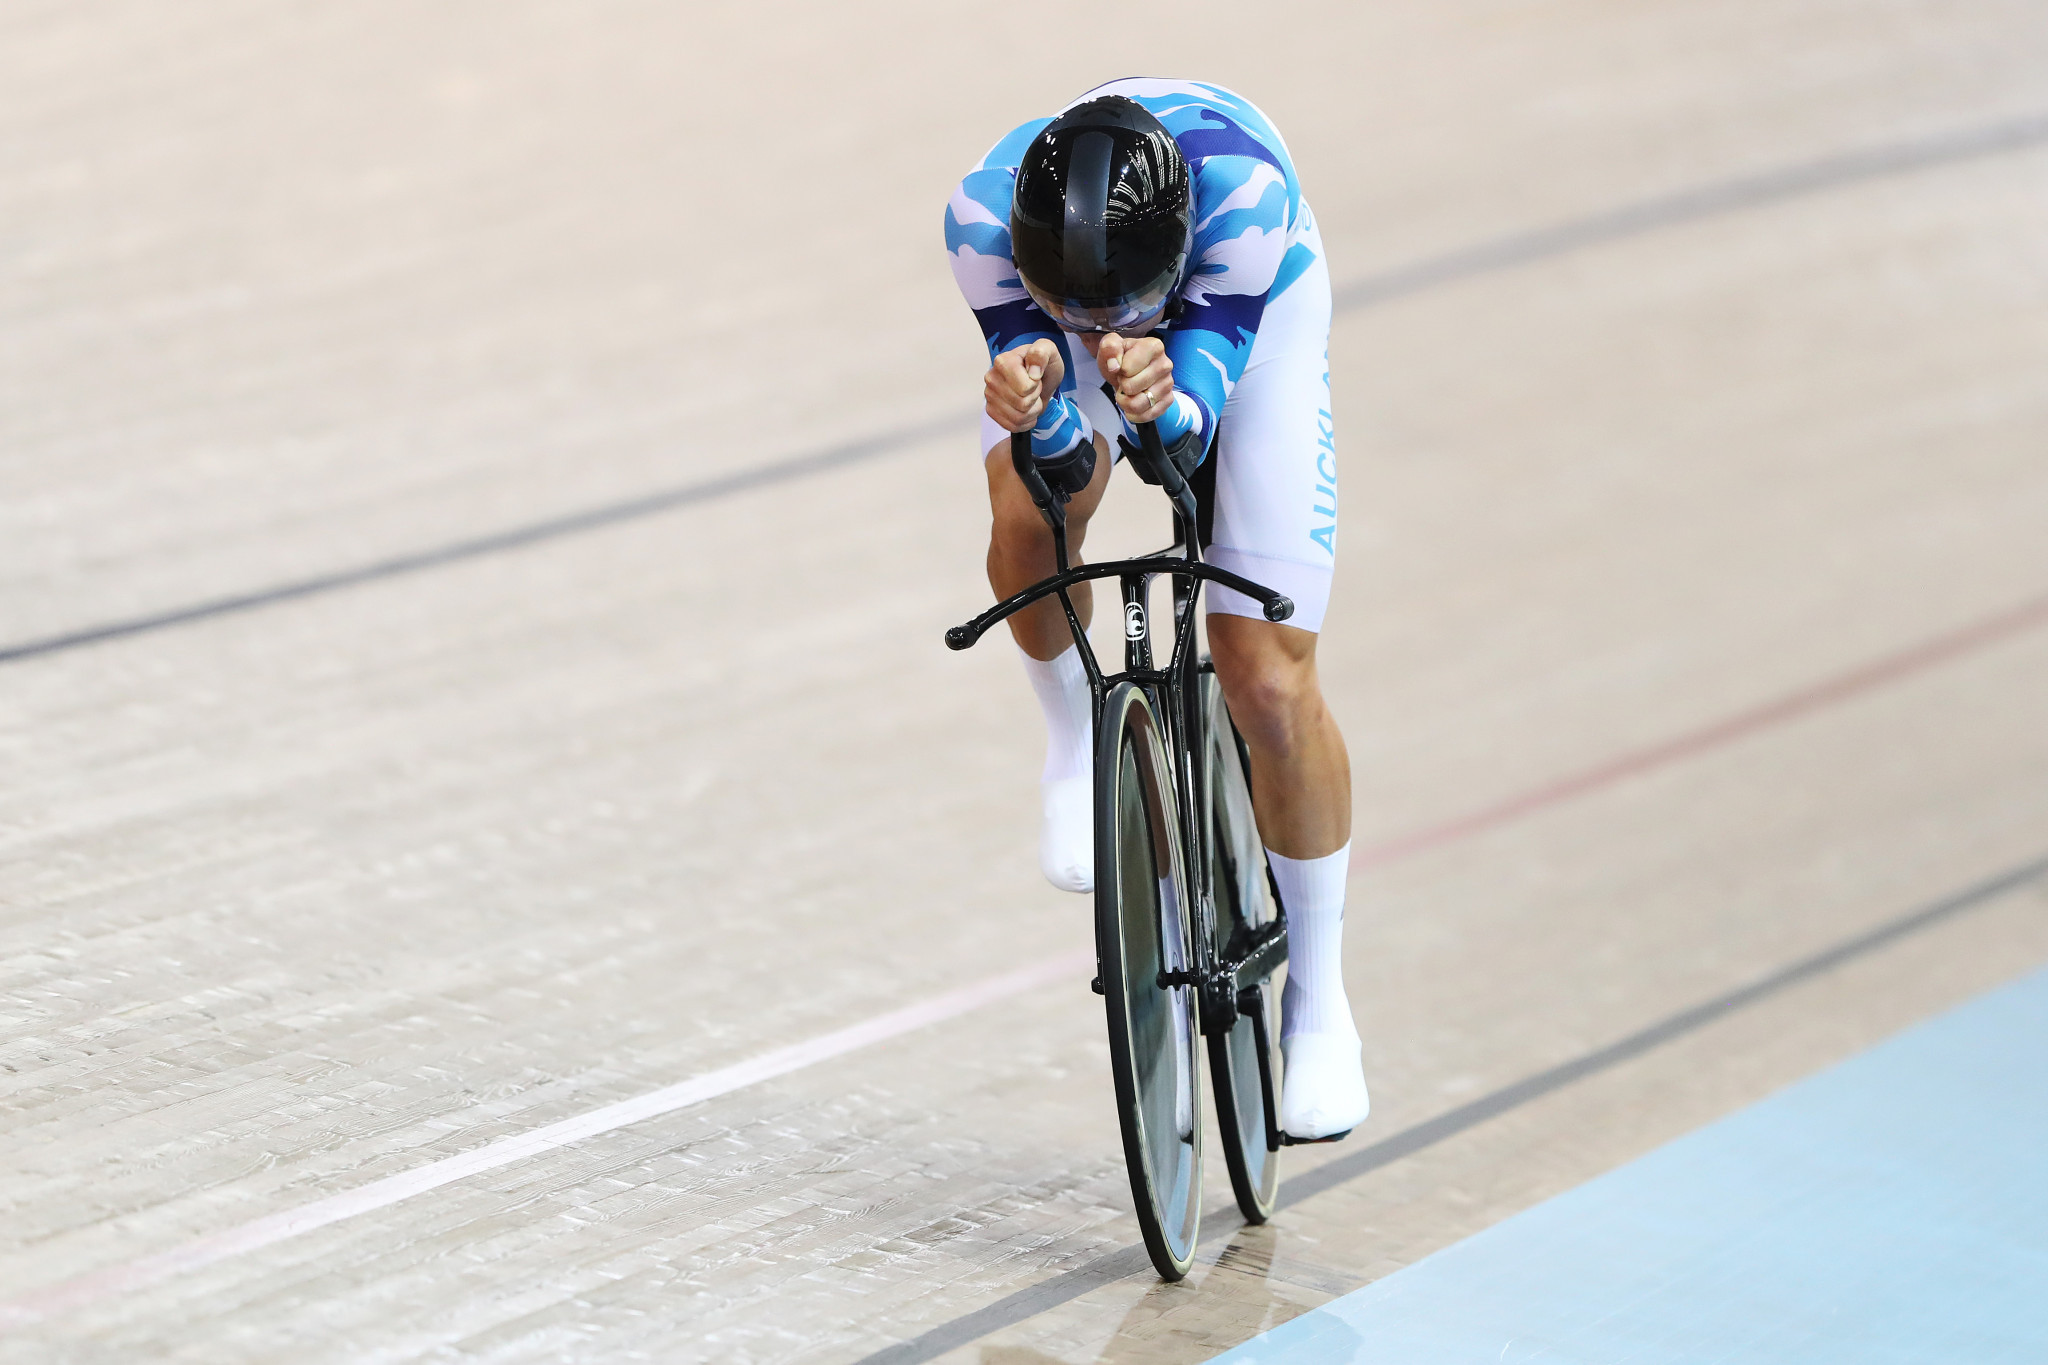 Gate and Moran win two golds each on day two of Oceania Track Cycling Championships